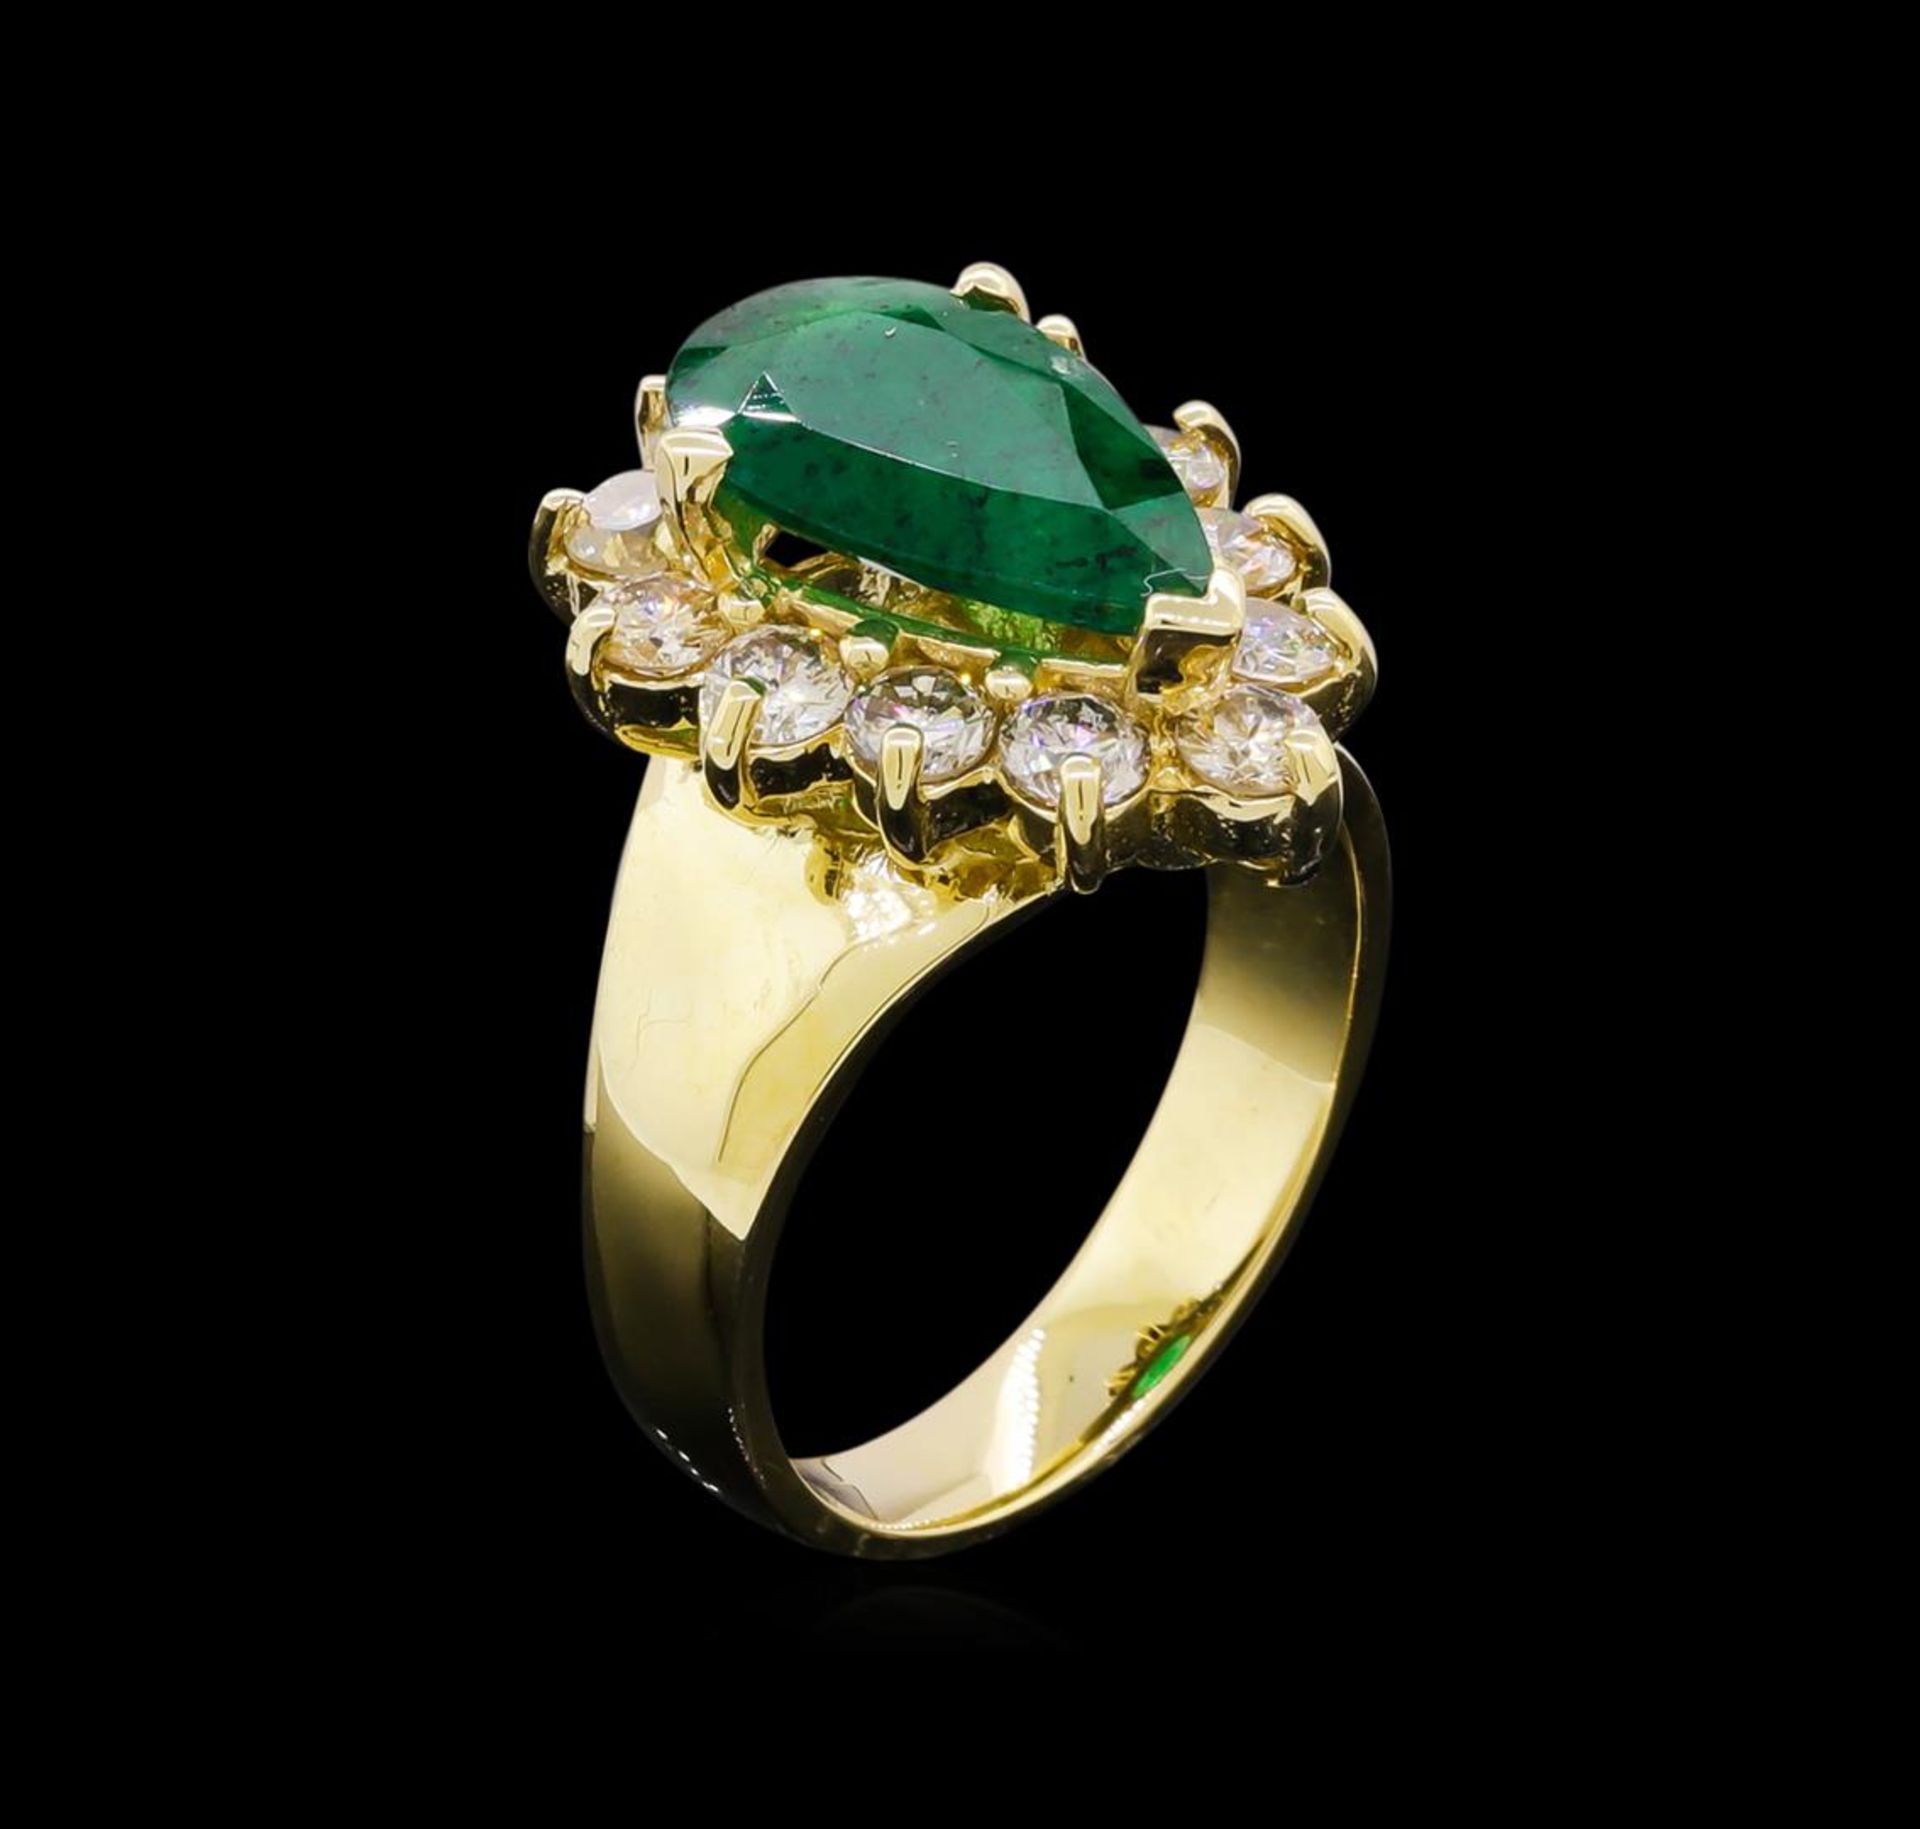 14KT Yellow Gold 2.48 ctw Emerald and Diamond Ring - Image 4 of 5